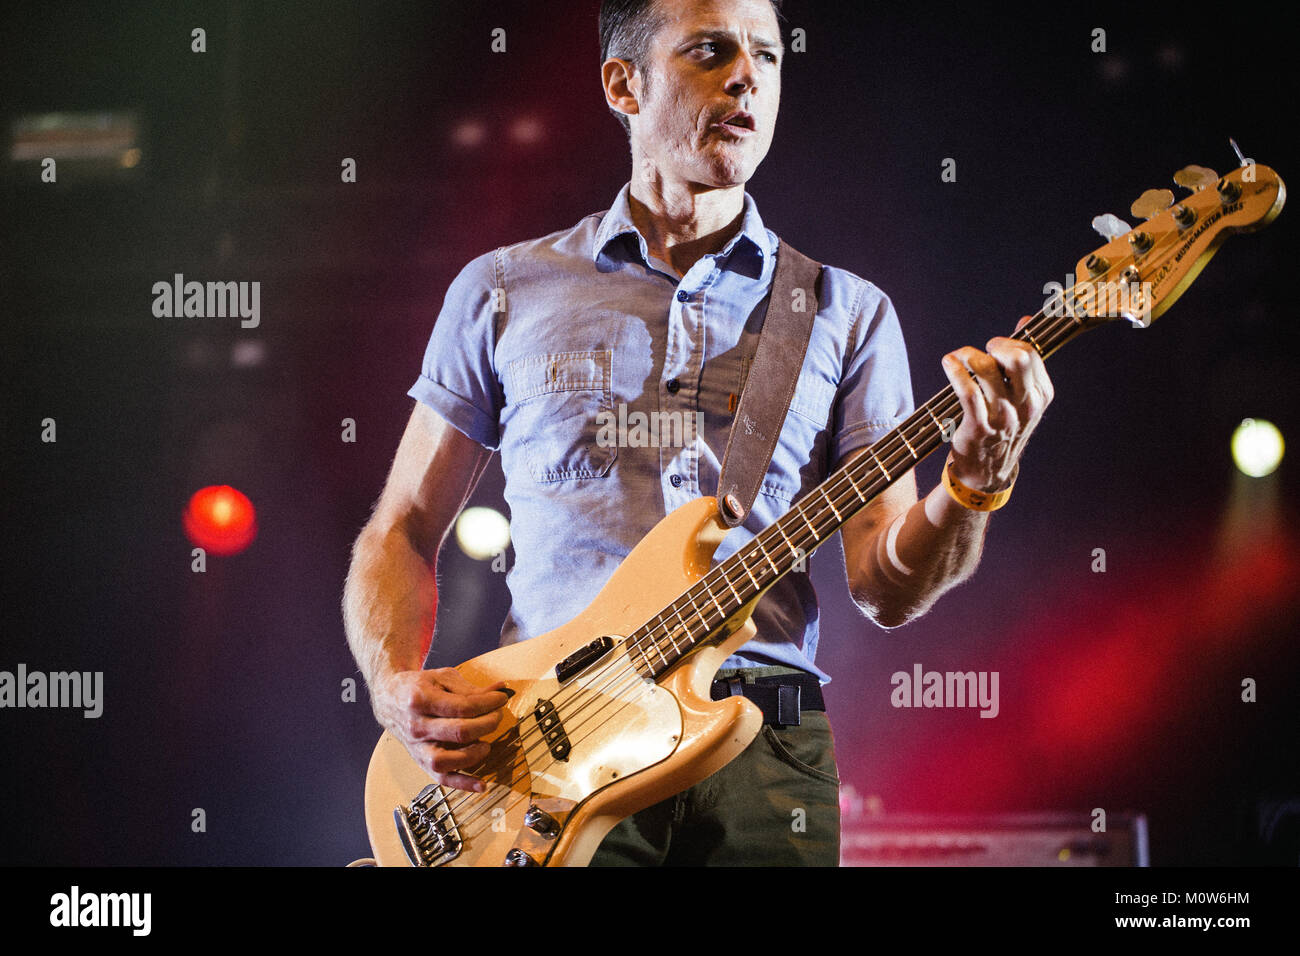 The American indie rock band Deerhunter performs a live concert at the Arena Stage at Roskilde Festival 2014. Here bassist Josh McKay is pictured live on stage. Denmark 06.07.2014. Stock Photo